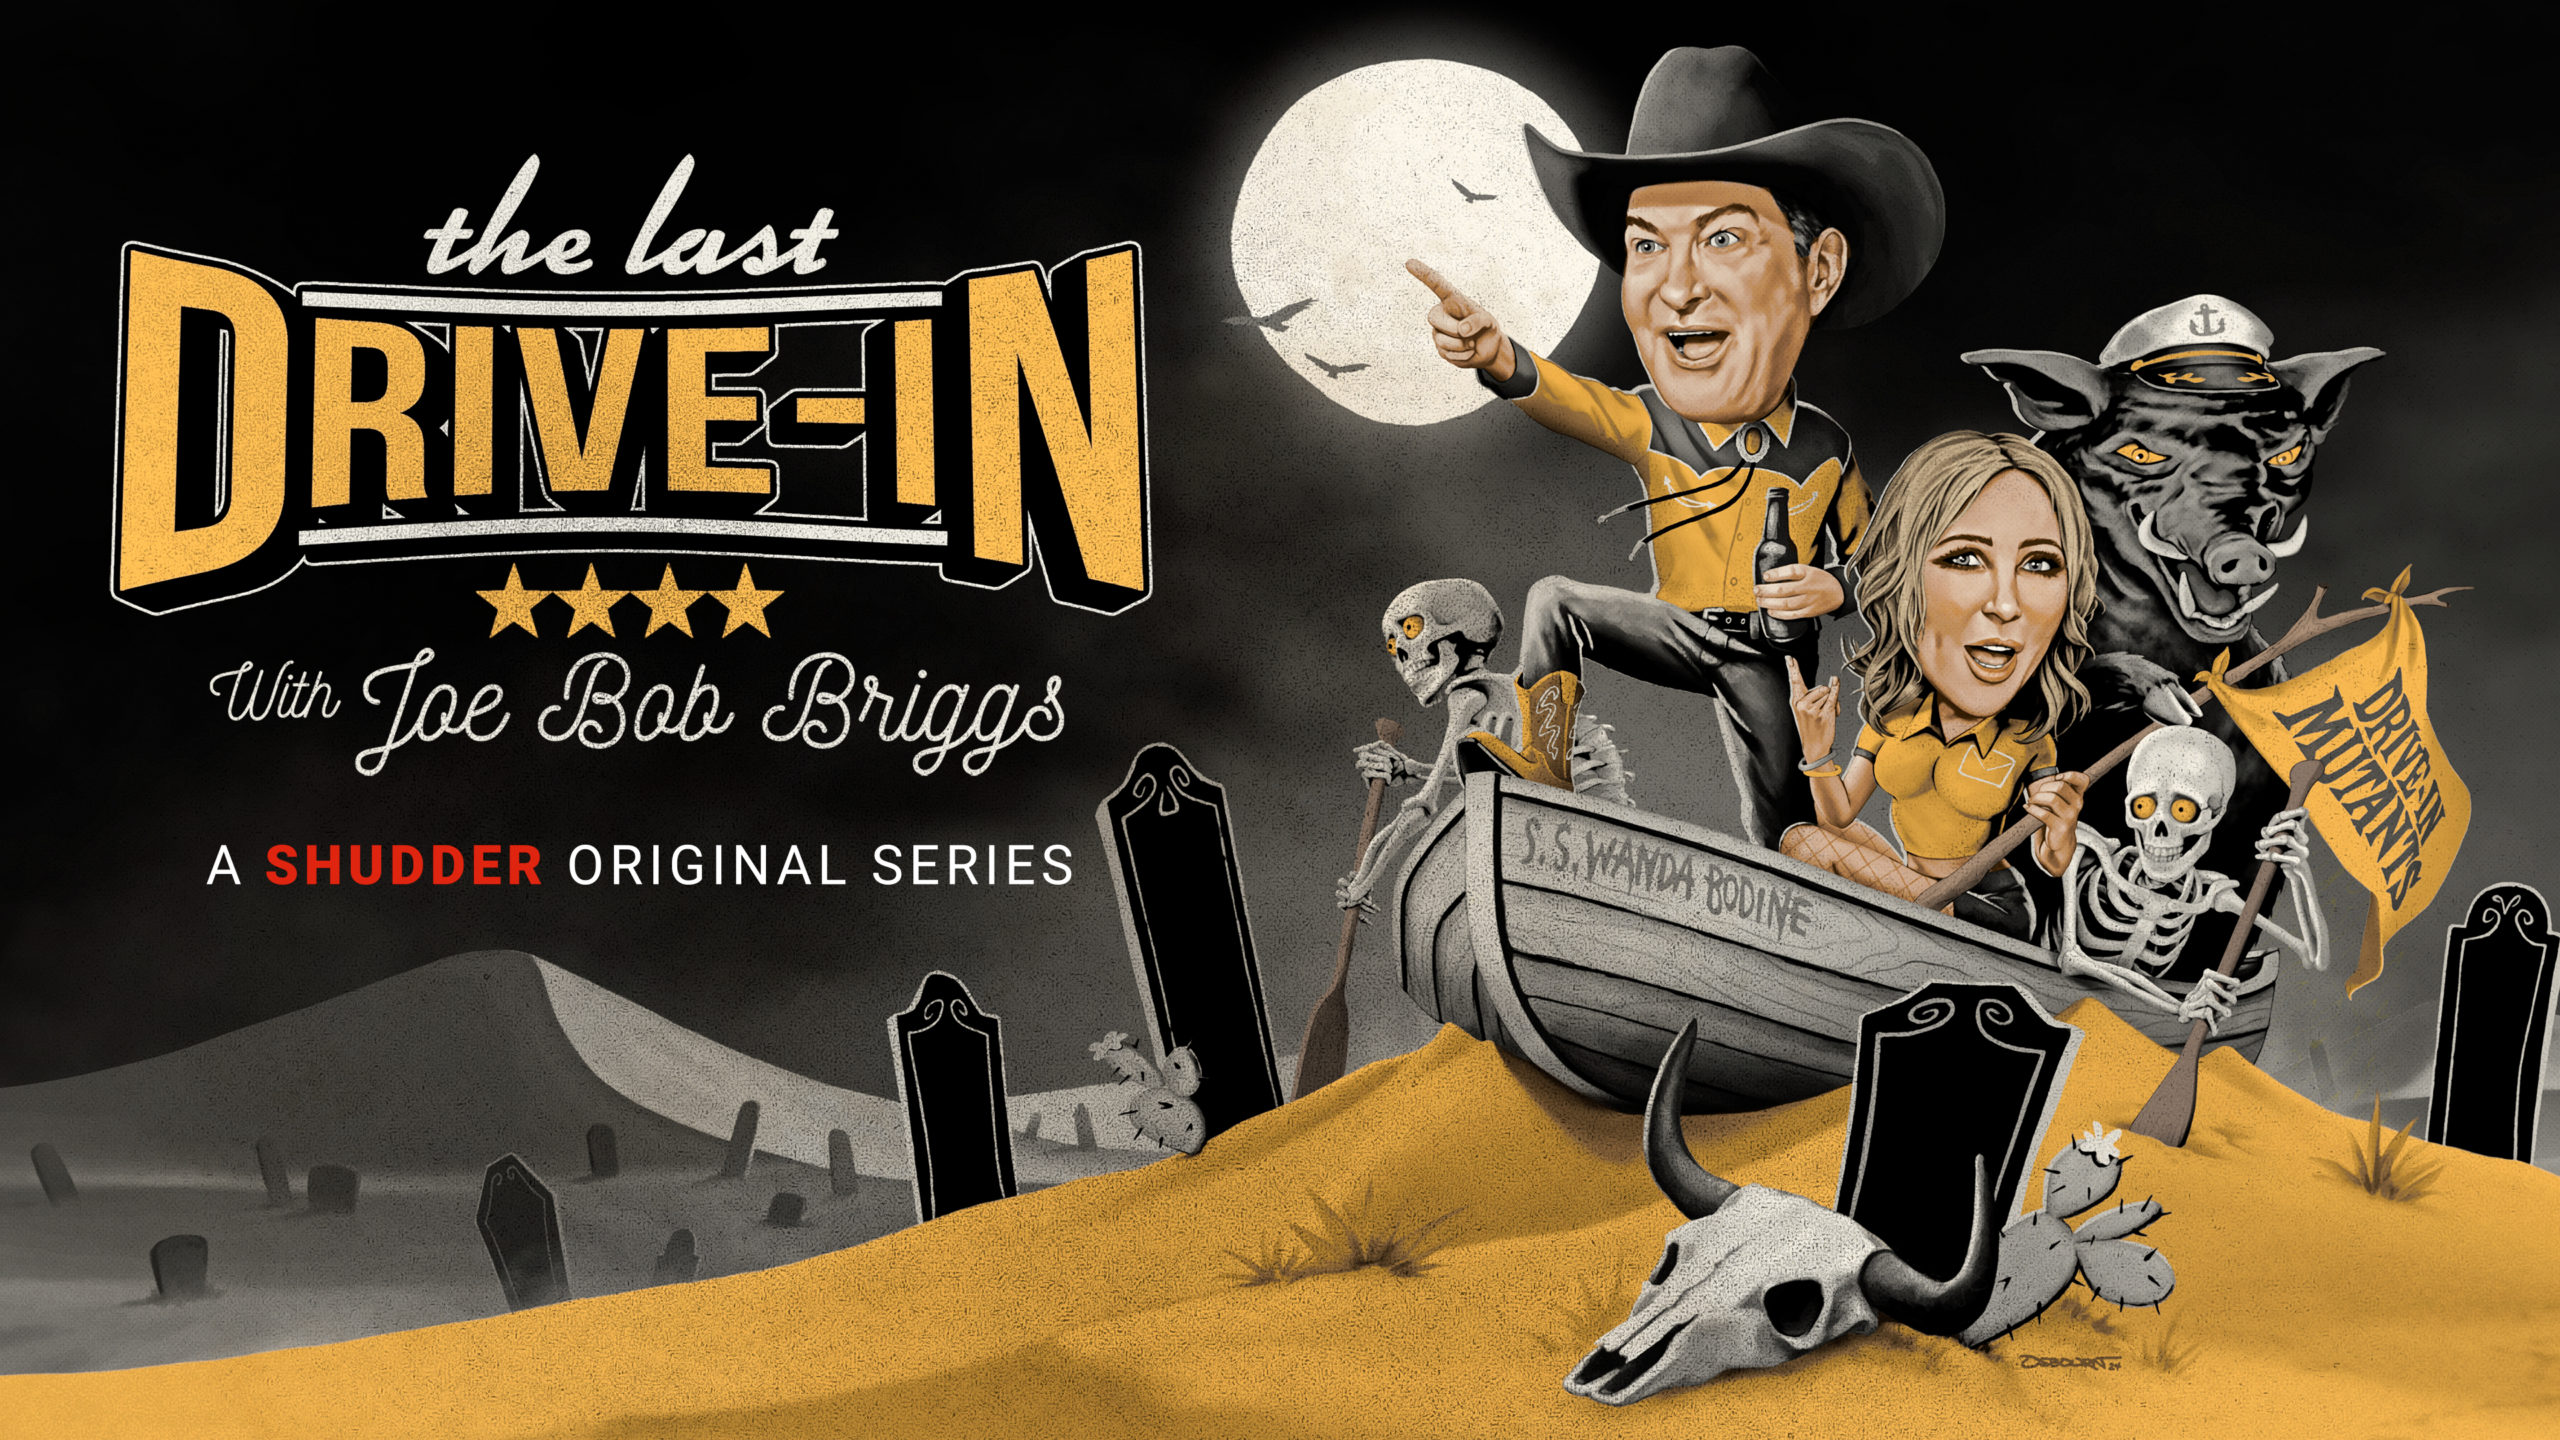 “I Don’t See Retiring from This” – Joe Bob Briggs Talks New “Last Drive-In” Format and the Show’s Future [Interview]